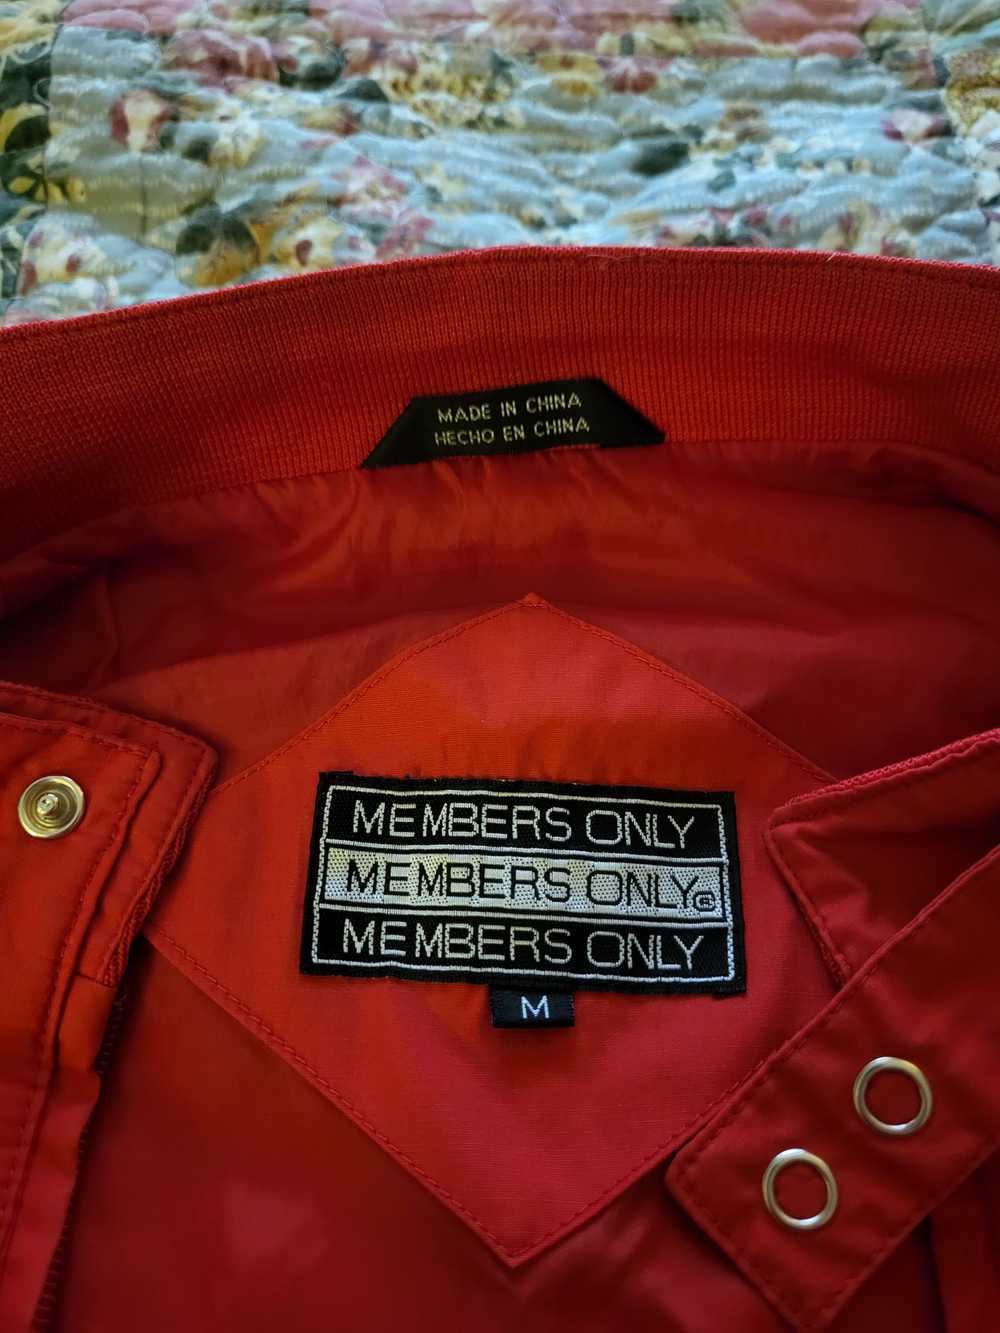 Members Only Members Only Classic Racer Jacket - image 4